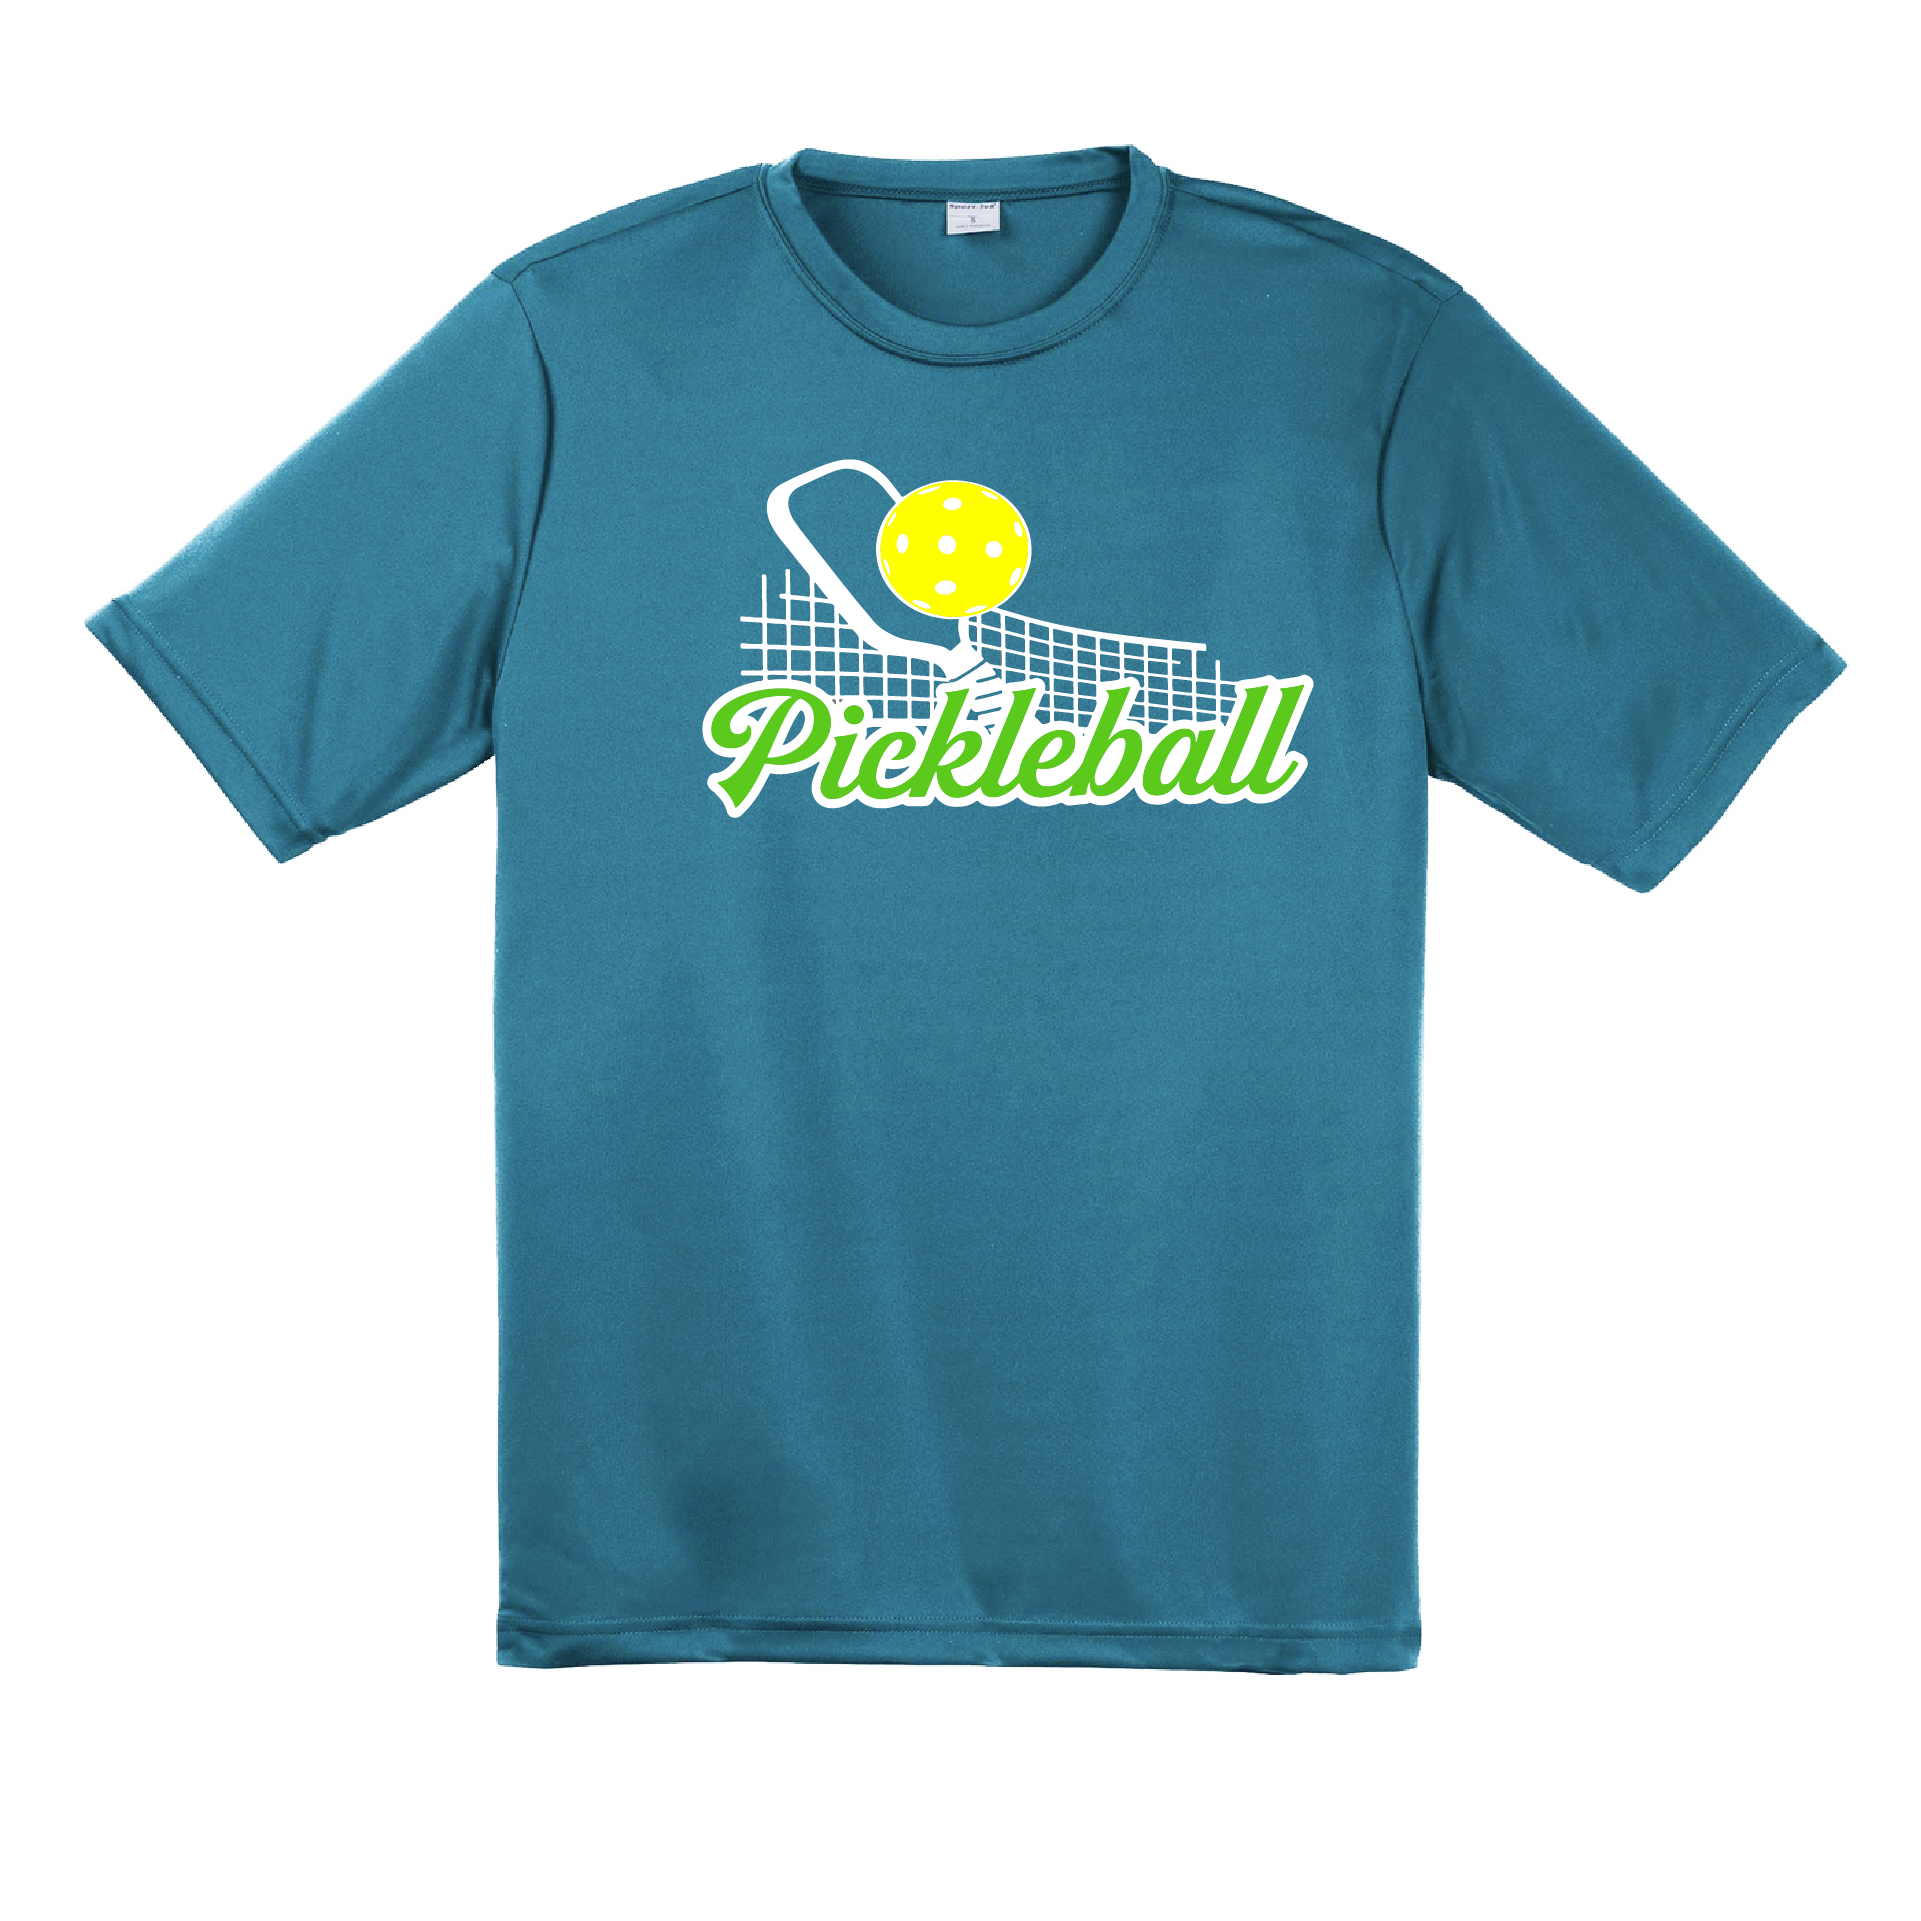 Pickleball Design: Pickleball Net  Men's Style:  Short Sleeve  Shirts are lightweight, roomy and highly breathable. These moisture-wicking shirts are designed for athletic performance. They feature PosiCharge technology to lock in color and prevent logos from fading. Removable tag and set-in sleeves for comfort.